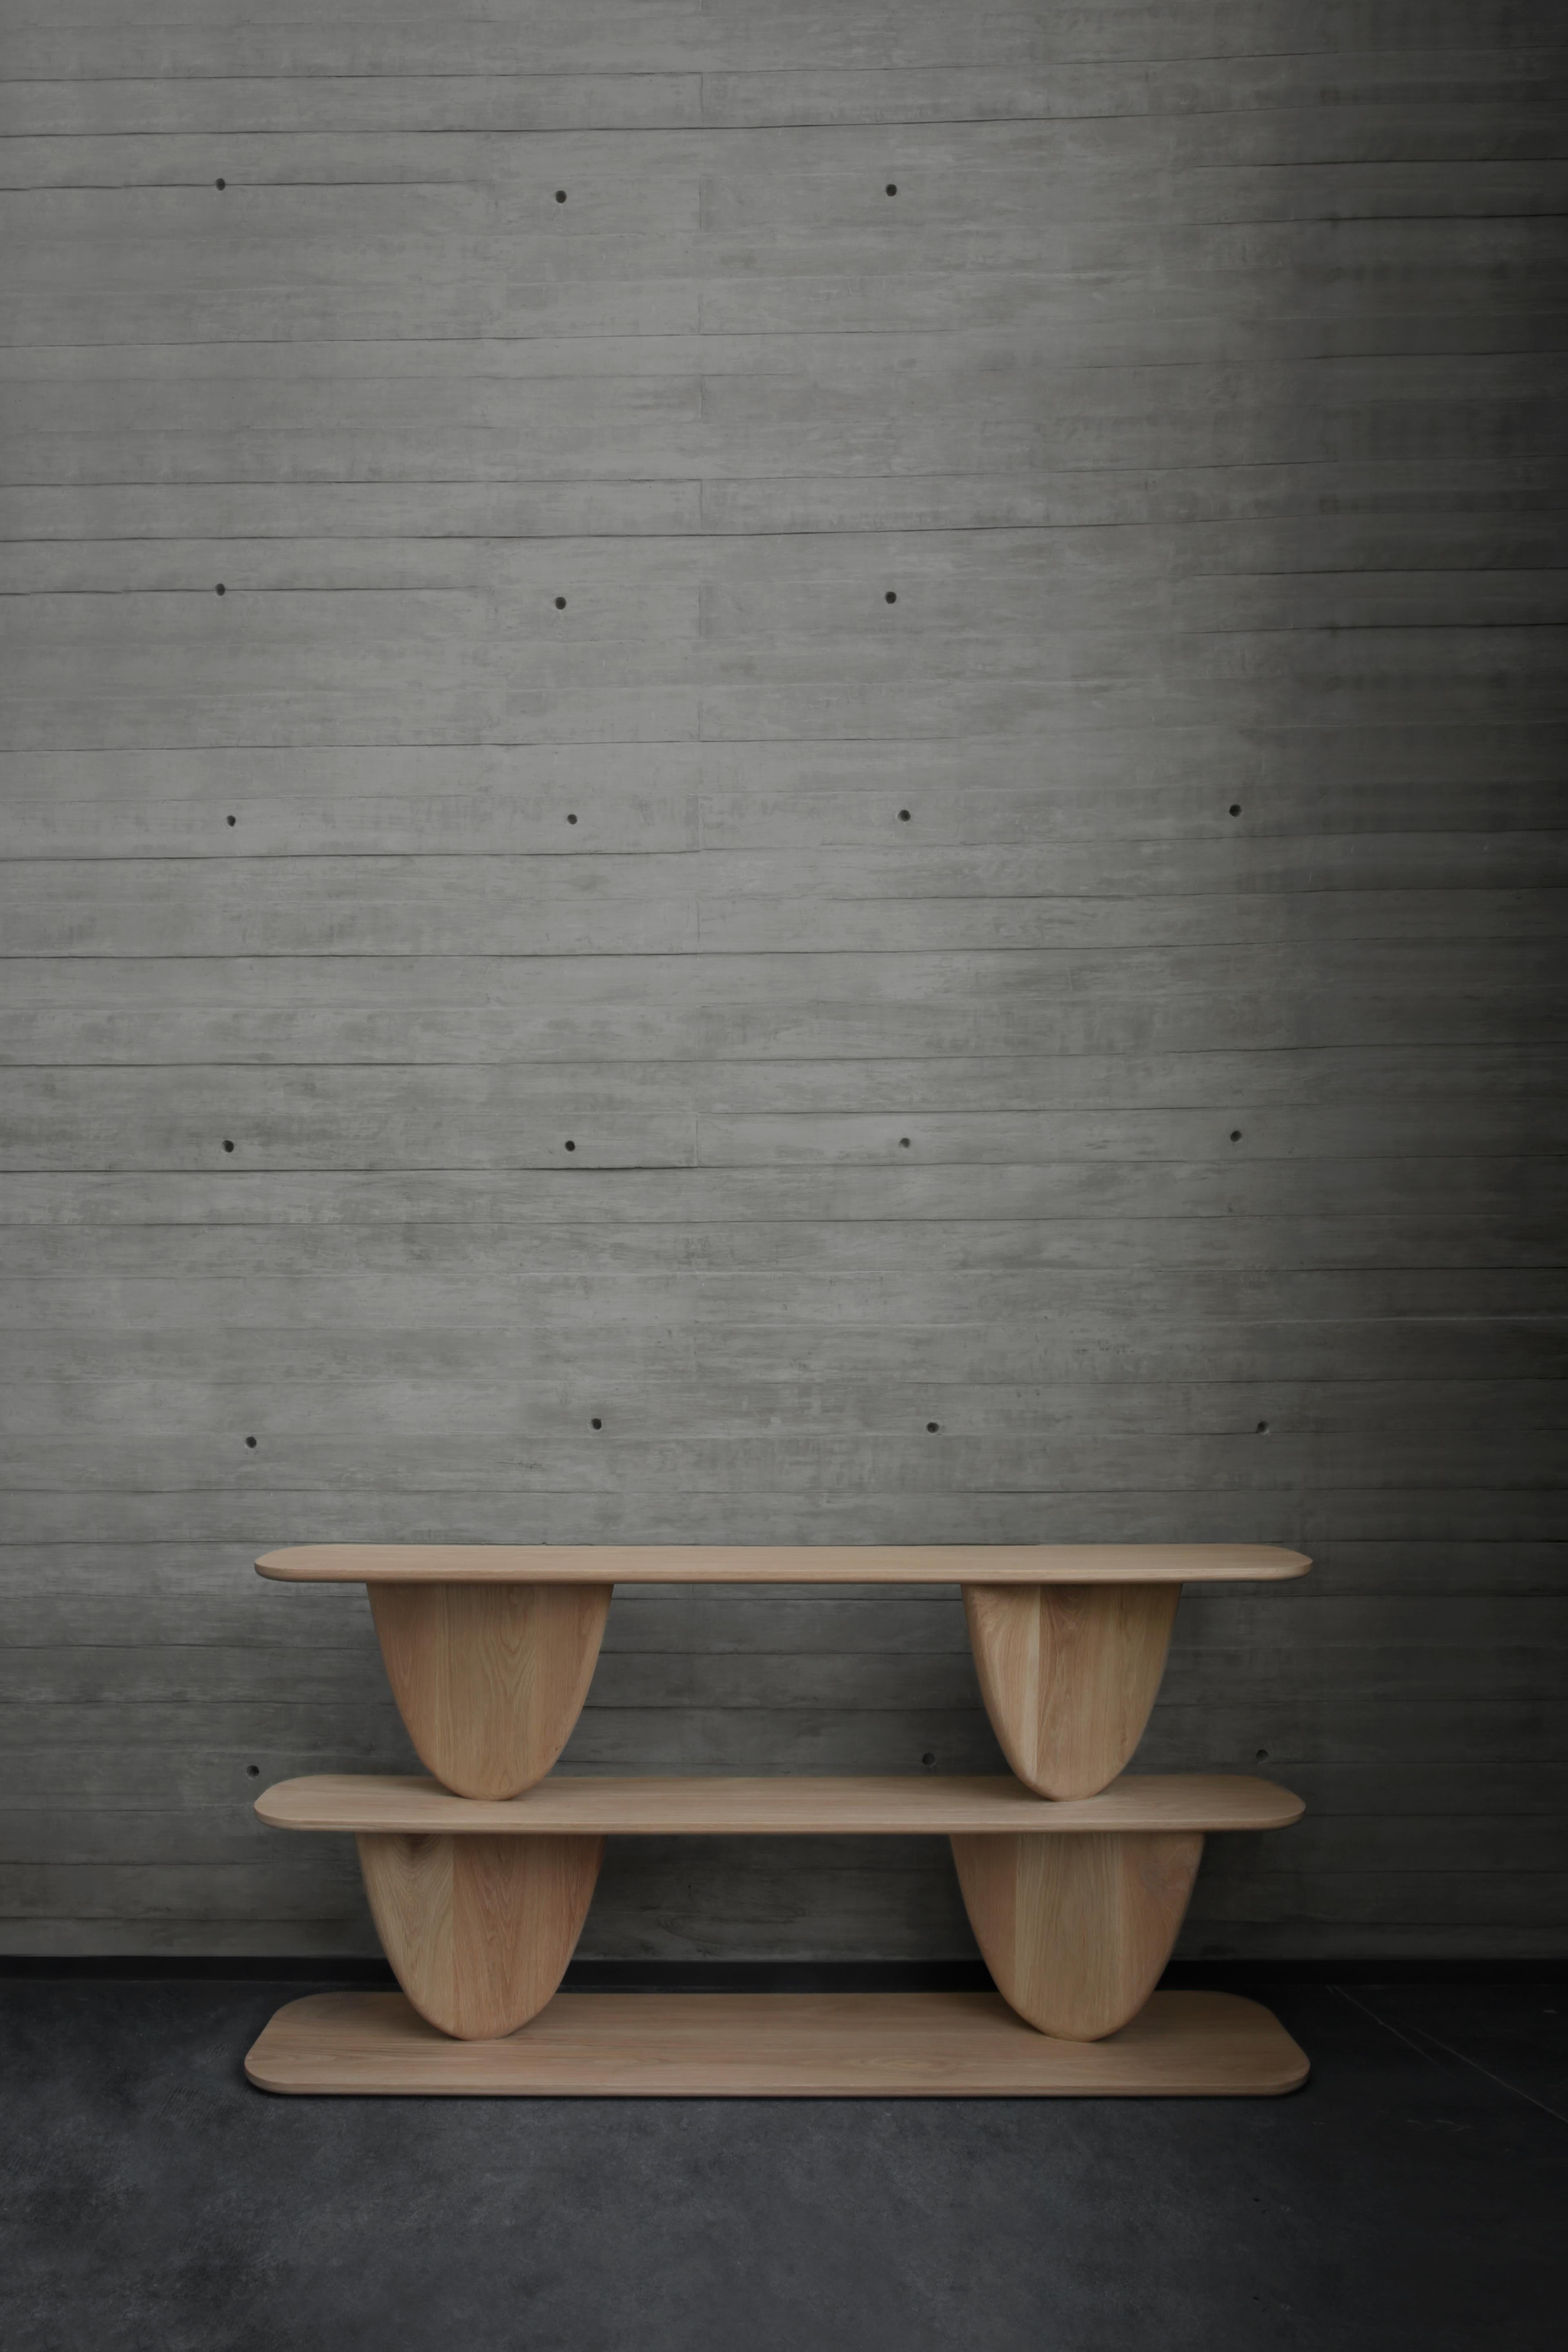 Noviembre IX, Console Table in Oak Wood, Sideboard by Joel Escalona

The Noviembre collection is inspired by the creative values of Constantin Brancusi, a Romanian sculptor considered one of the most influential artists of the twentieth century,